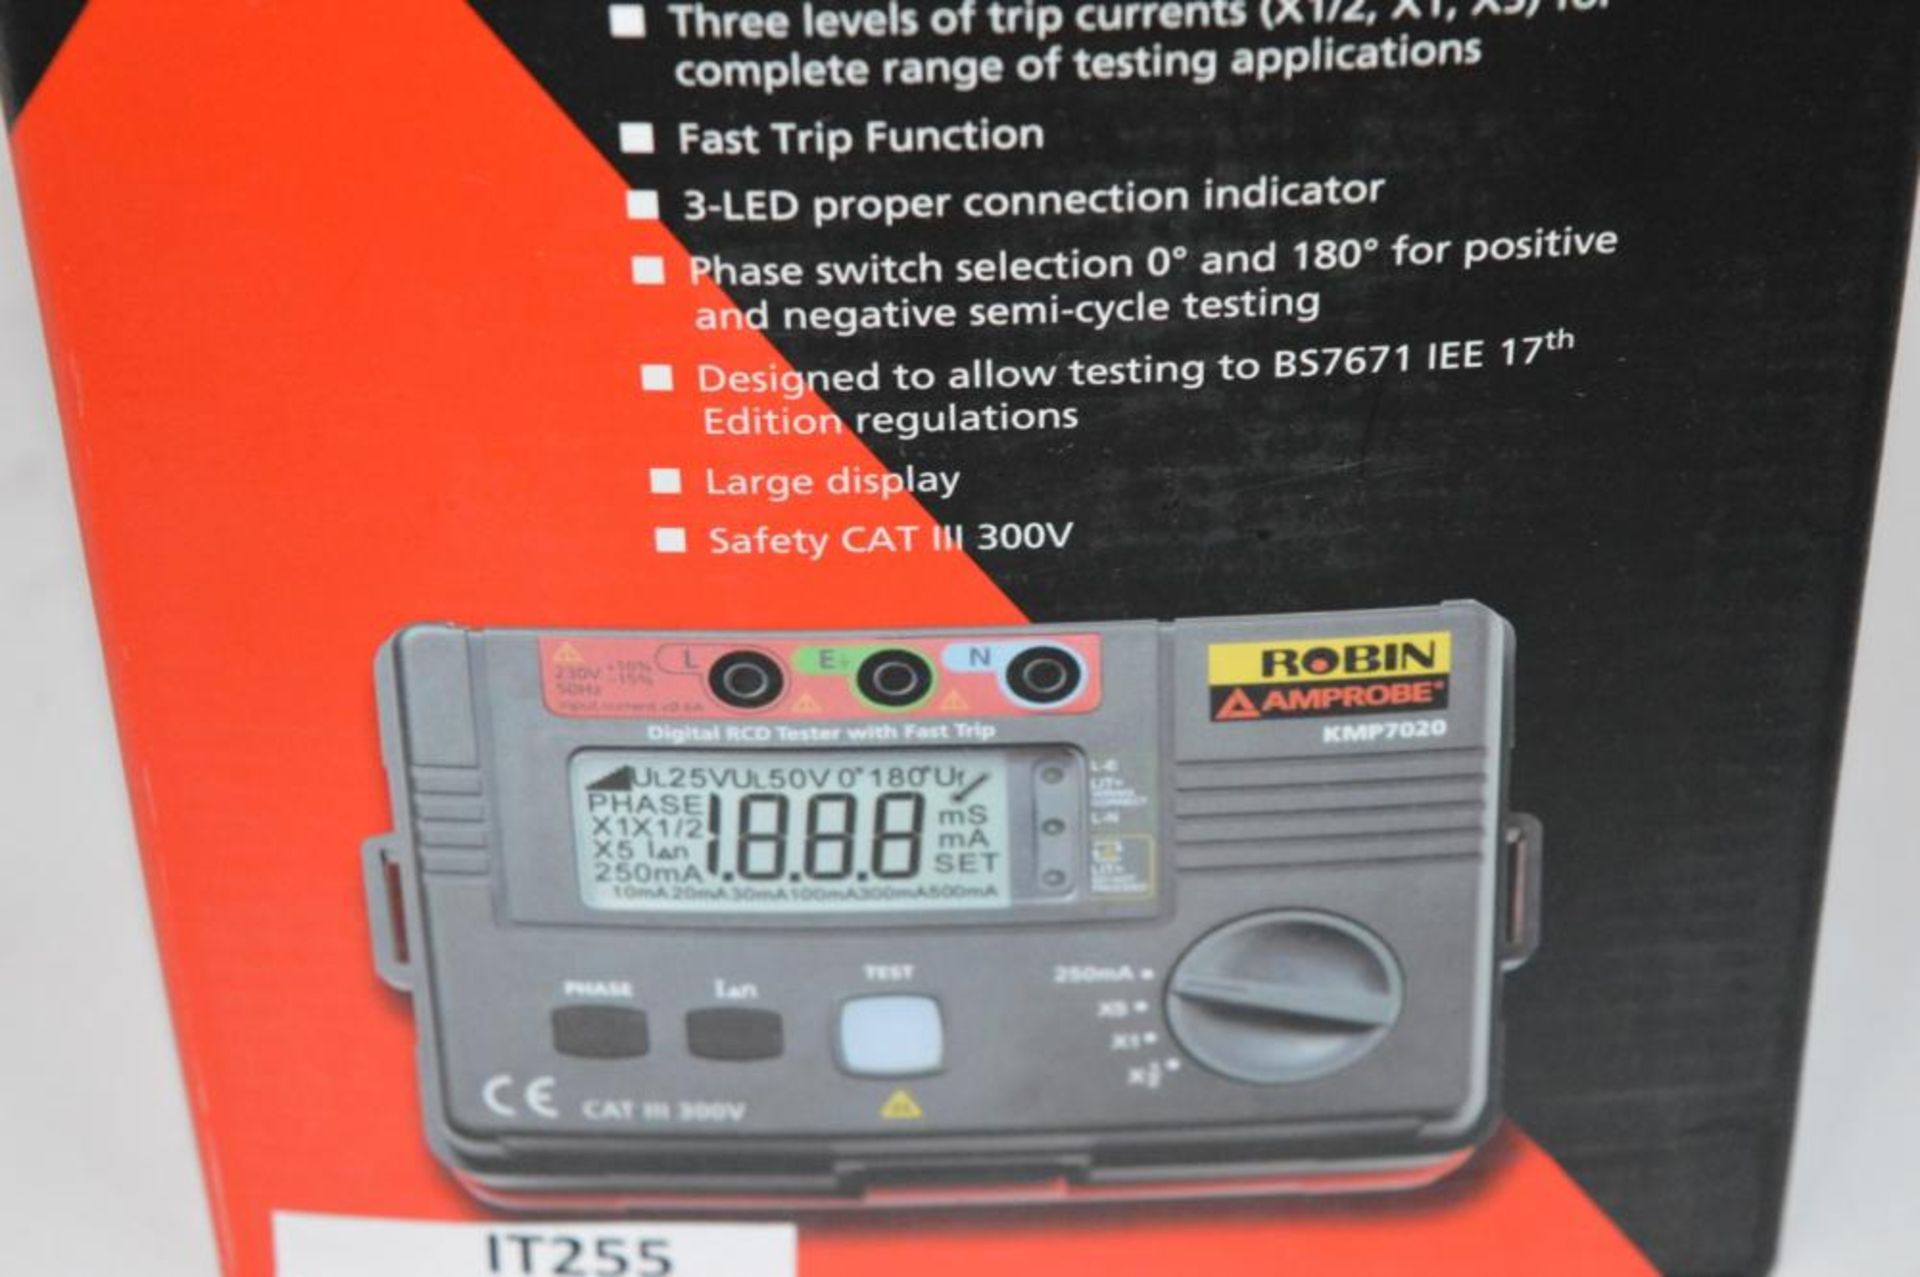 1 x Robin Amprobe Digital RCD Tester With Fast Trip - Model KMP7020 - Boxed With All Accessories - C - Image 10 of 12